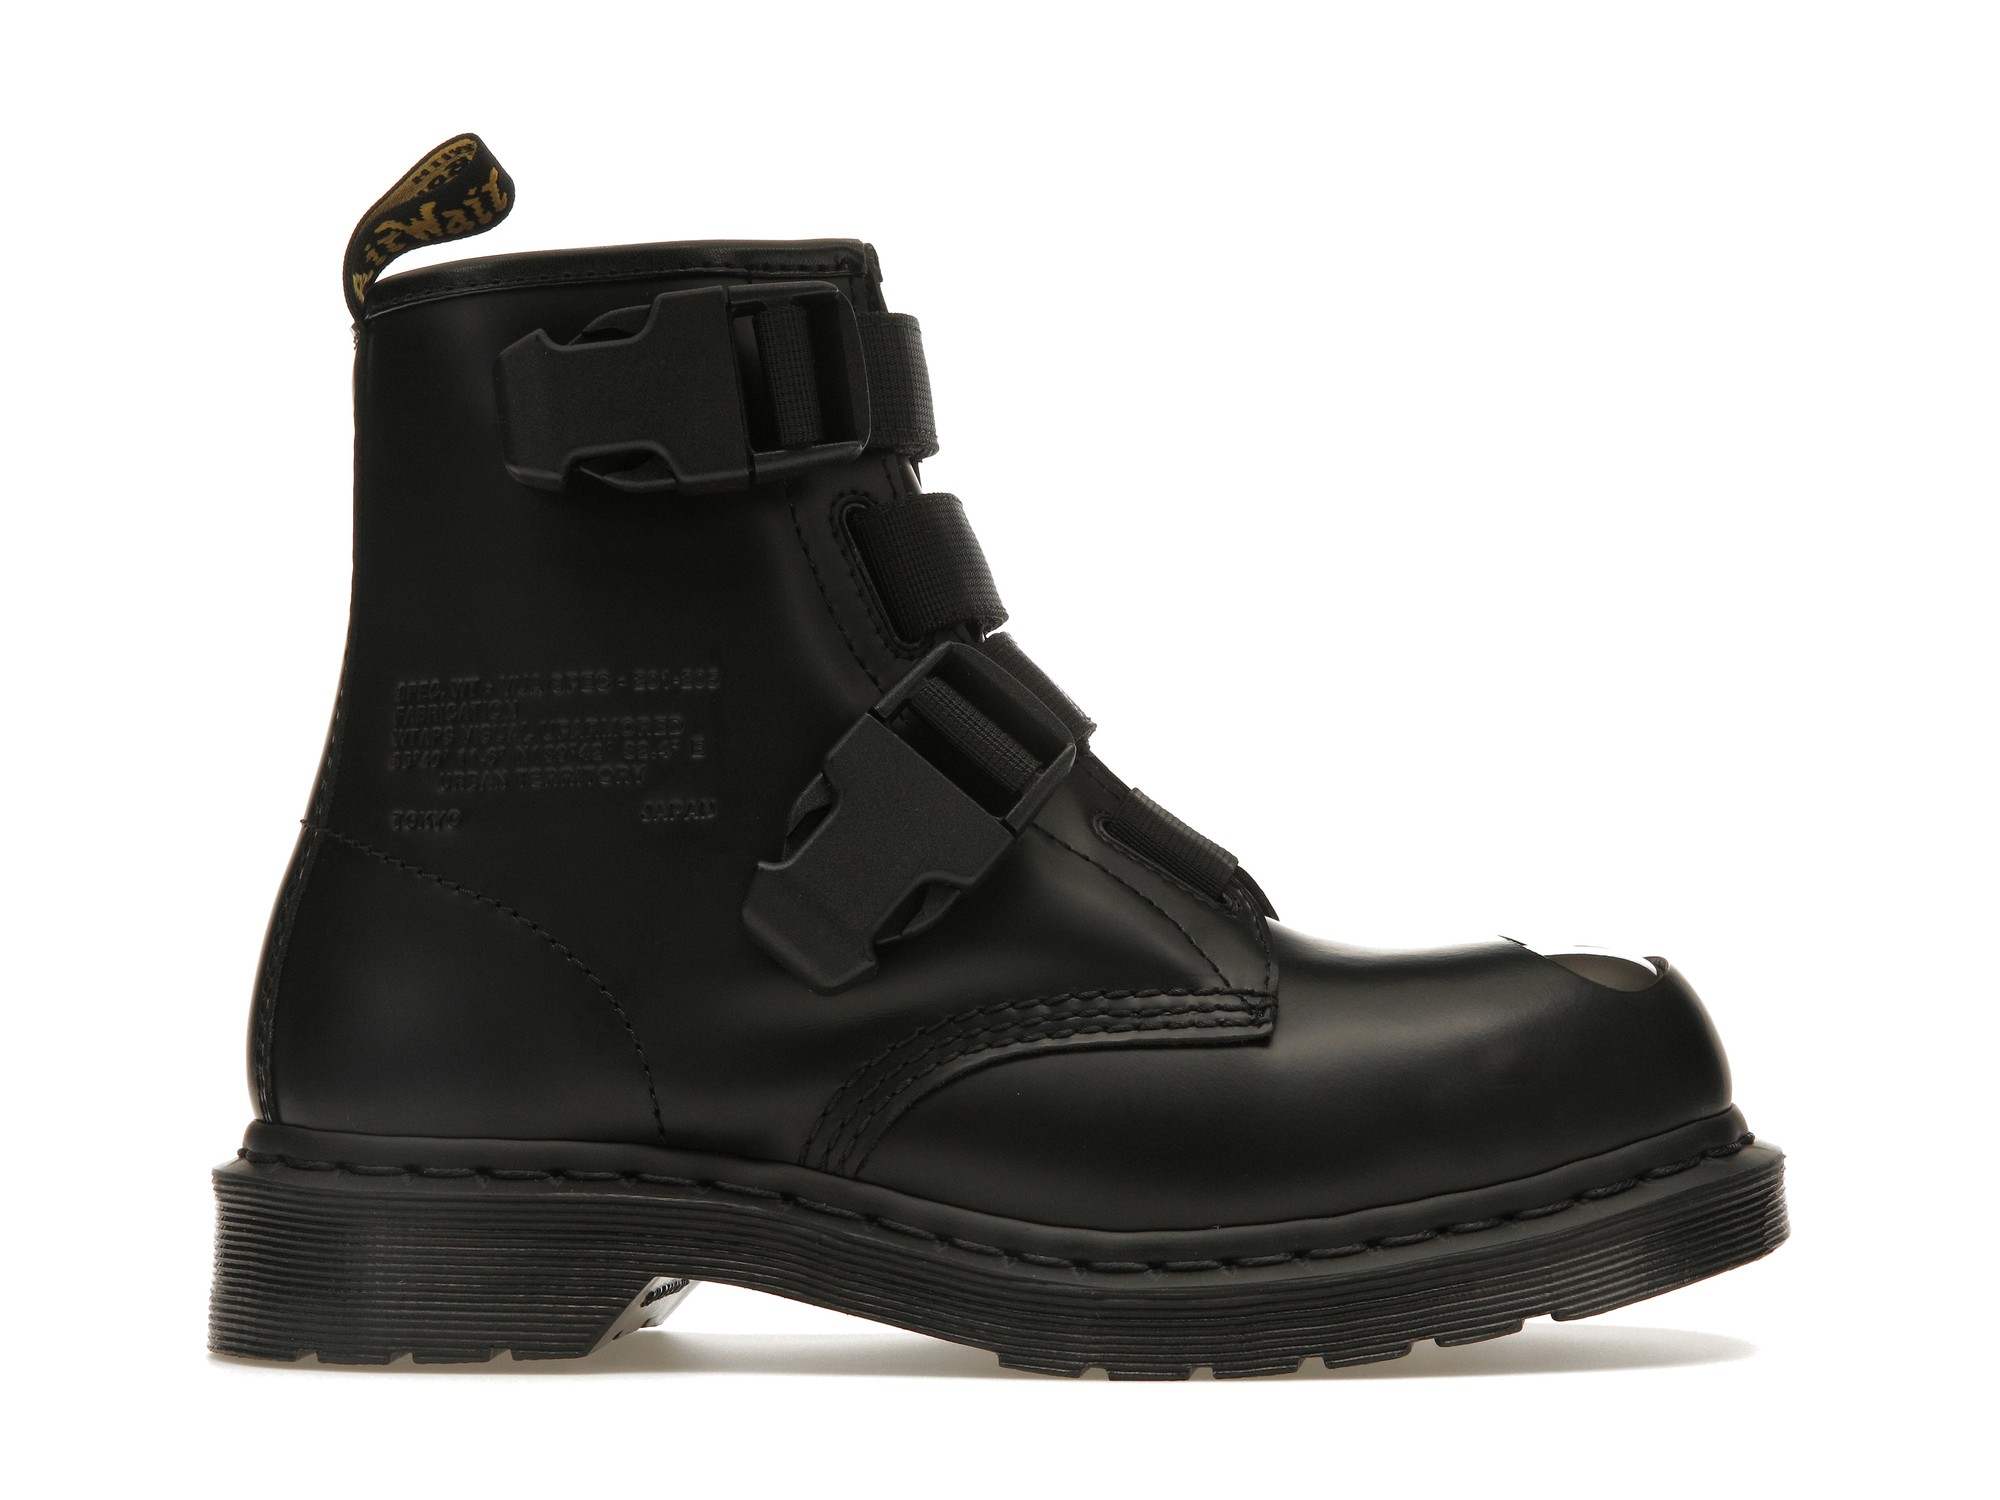 DR. MARTENS X WTAPS 1460 REMASTERED BOOT